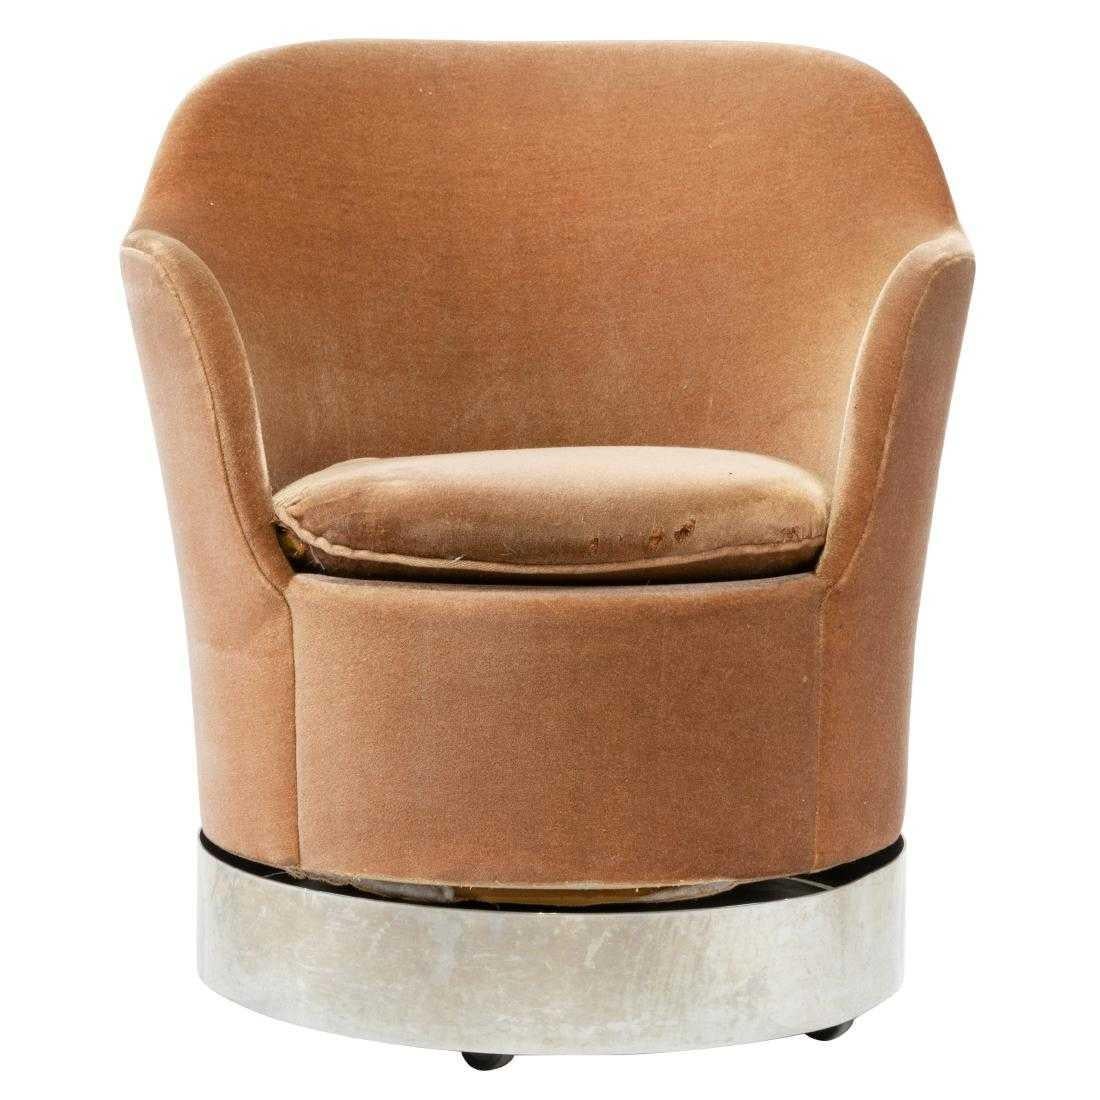 Three Philip Enfield swivel chairs. Original pair of 1970s swivel chairs by Phillip Enfield. These chairs have polished steel bases with original mohair upholstery. The chairs swivel, rock and roll smoothly on castors.